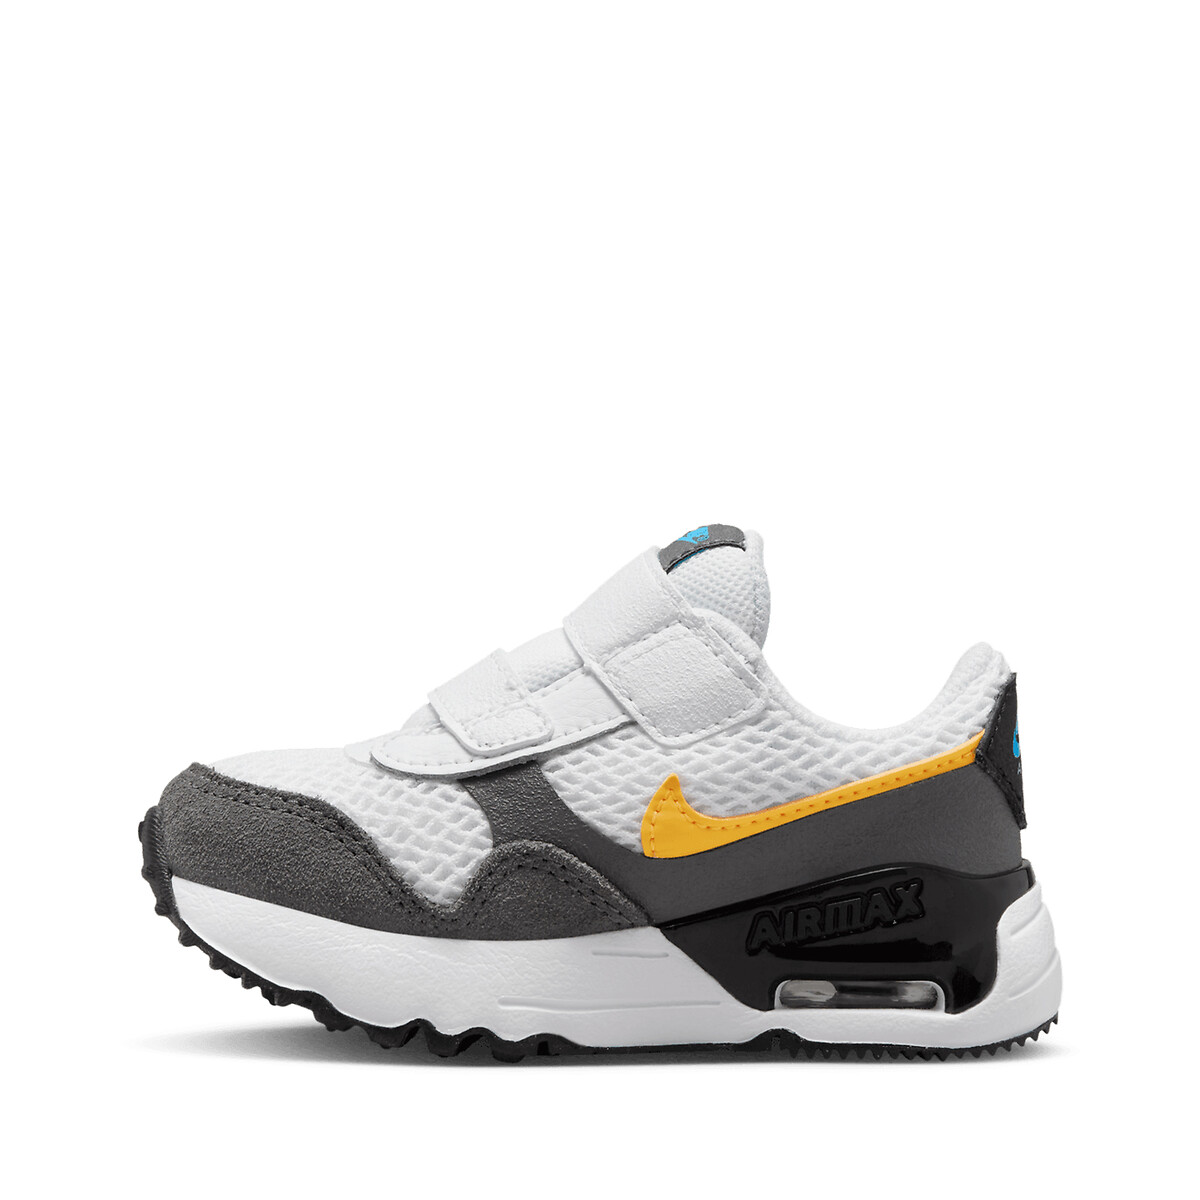 La air Nike Sneakers systm weiss max | Redoute